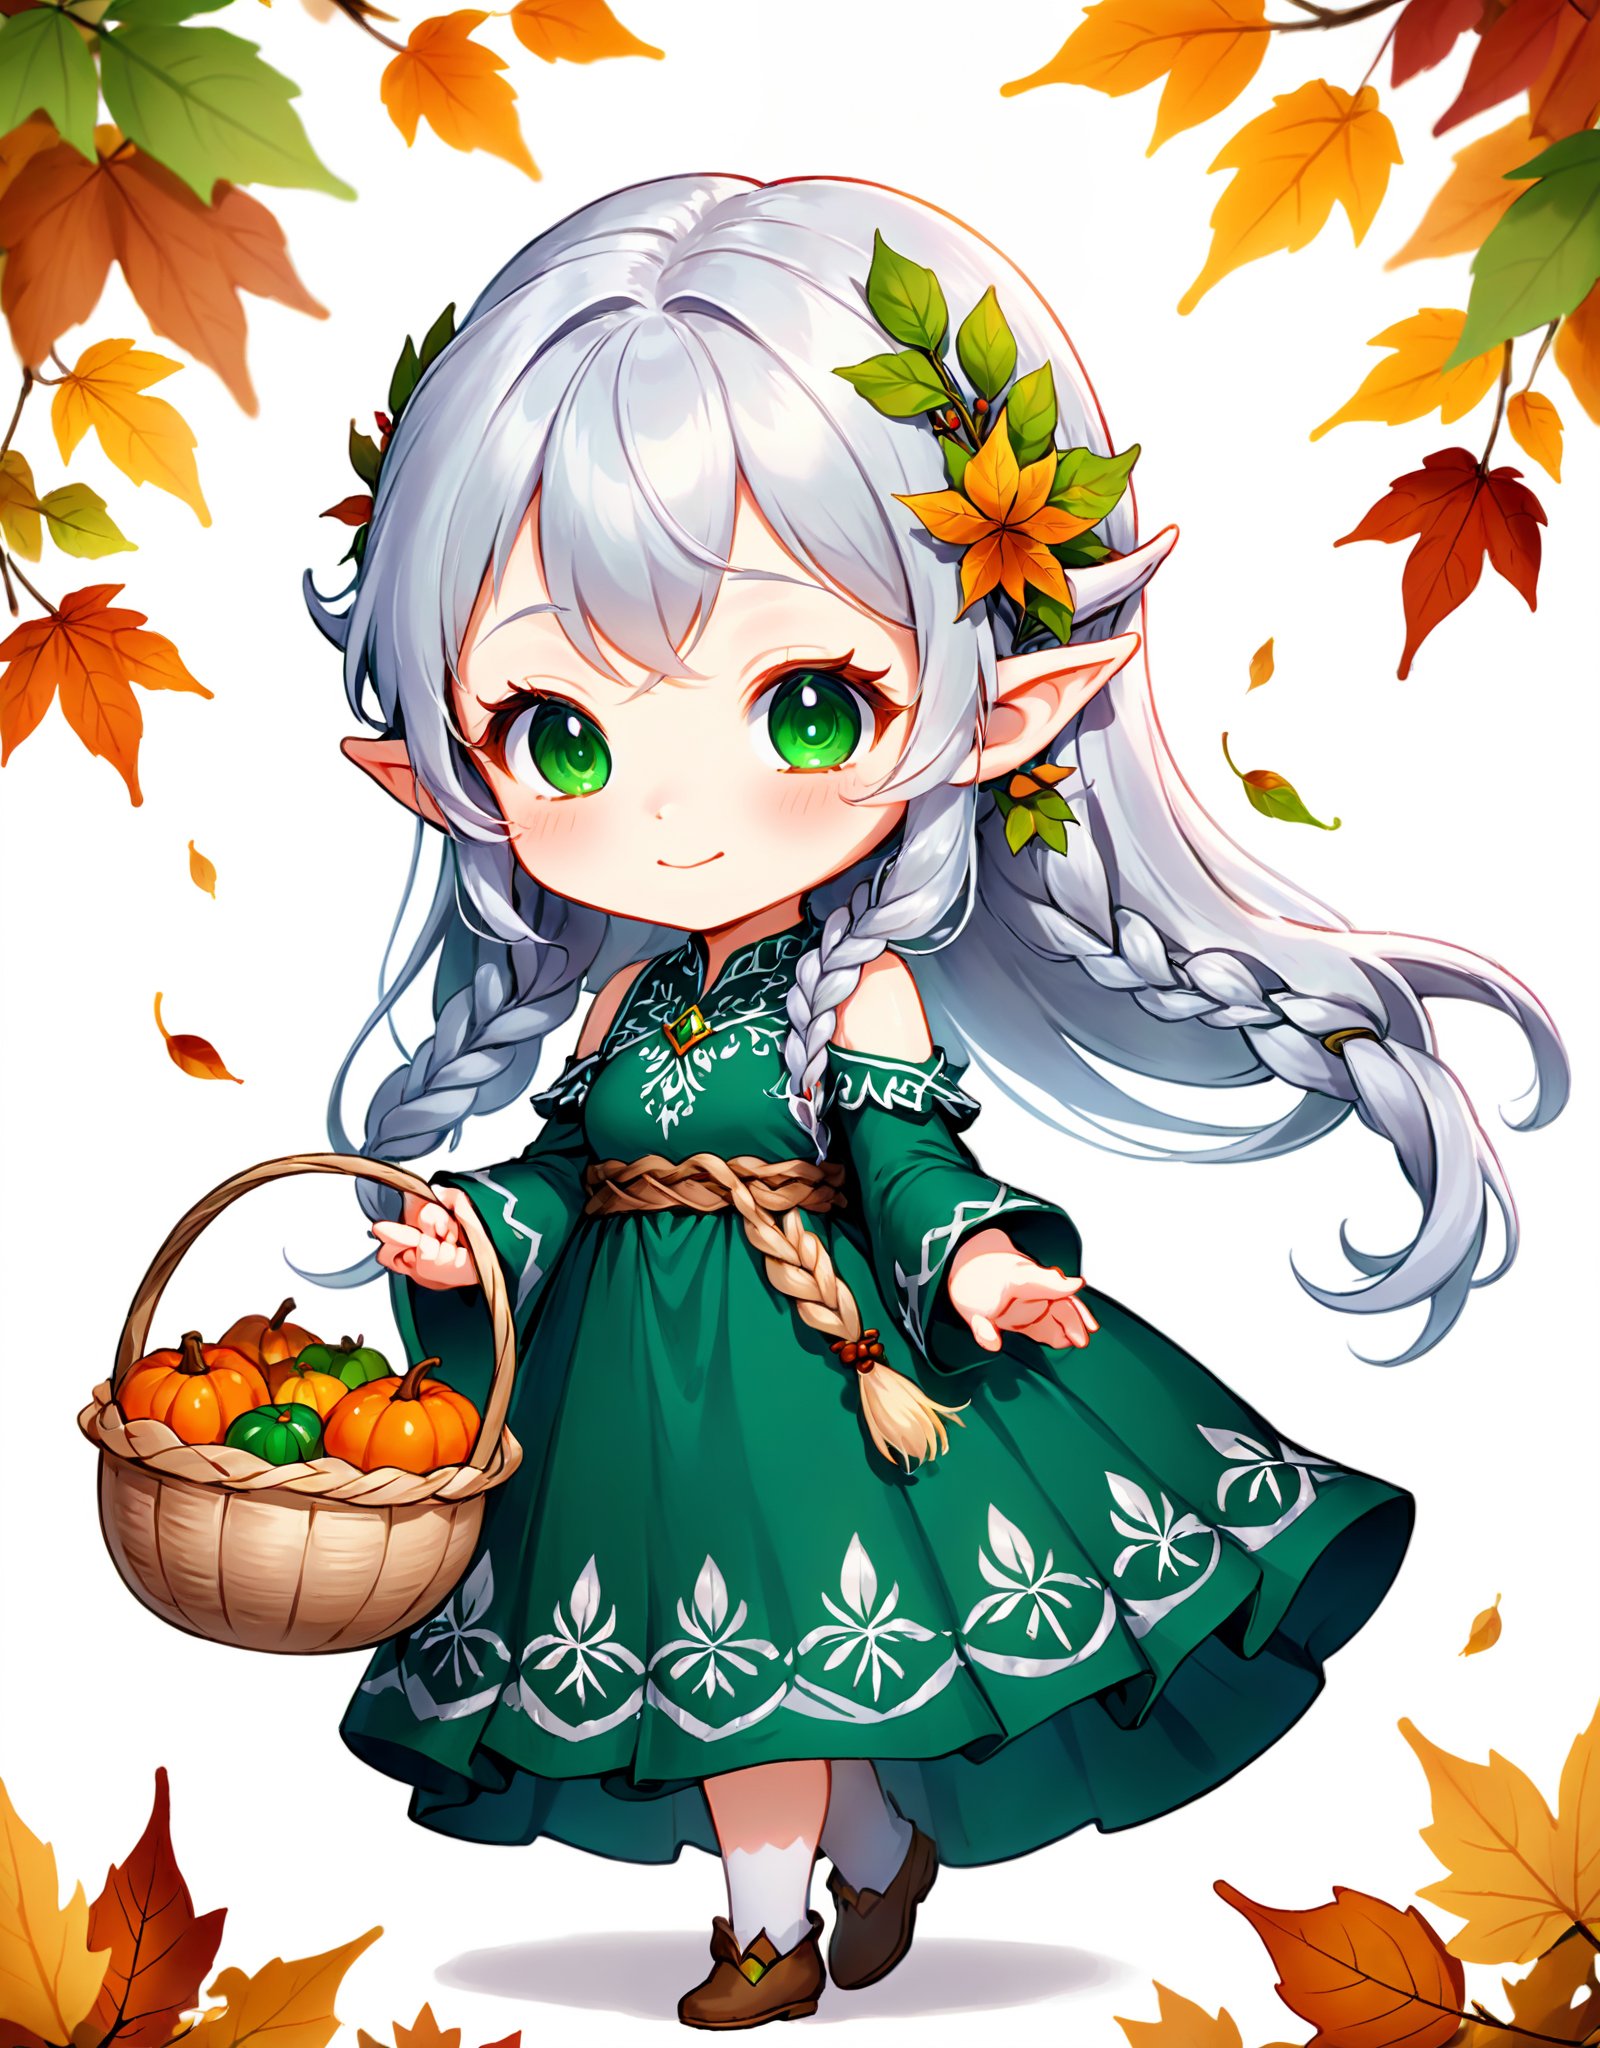 highres,best quality,detailed background,A chibi elf girl, around 50 years old, with long silver hair in a braid wearing a flowy emerald green dress adorned with delicate leaf patterns. She is happily carrying a basket of colorful autumn leaves, her pointed ears peeking out under her braided hair.